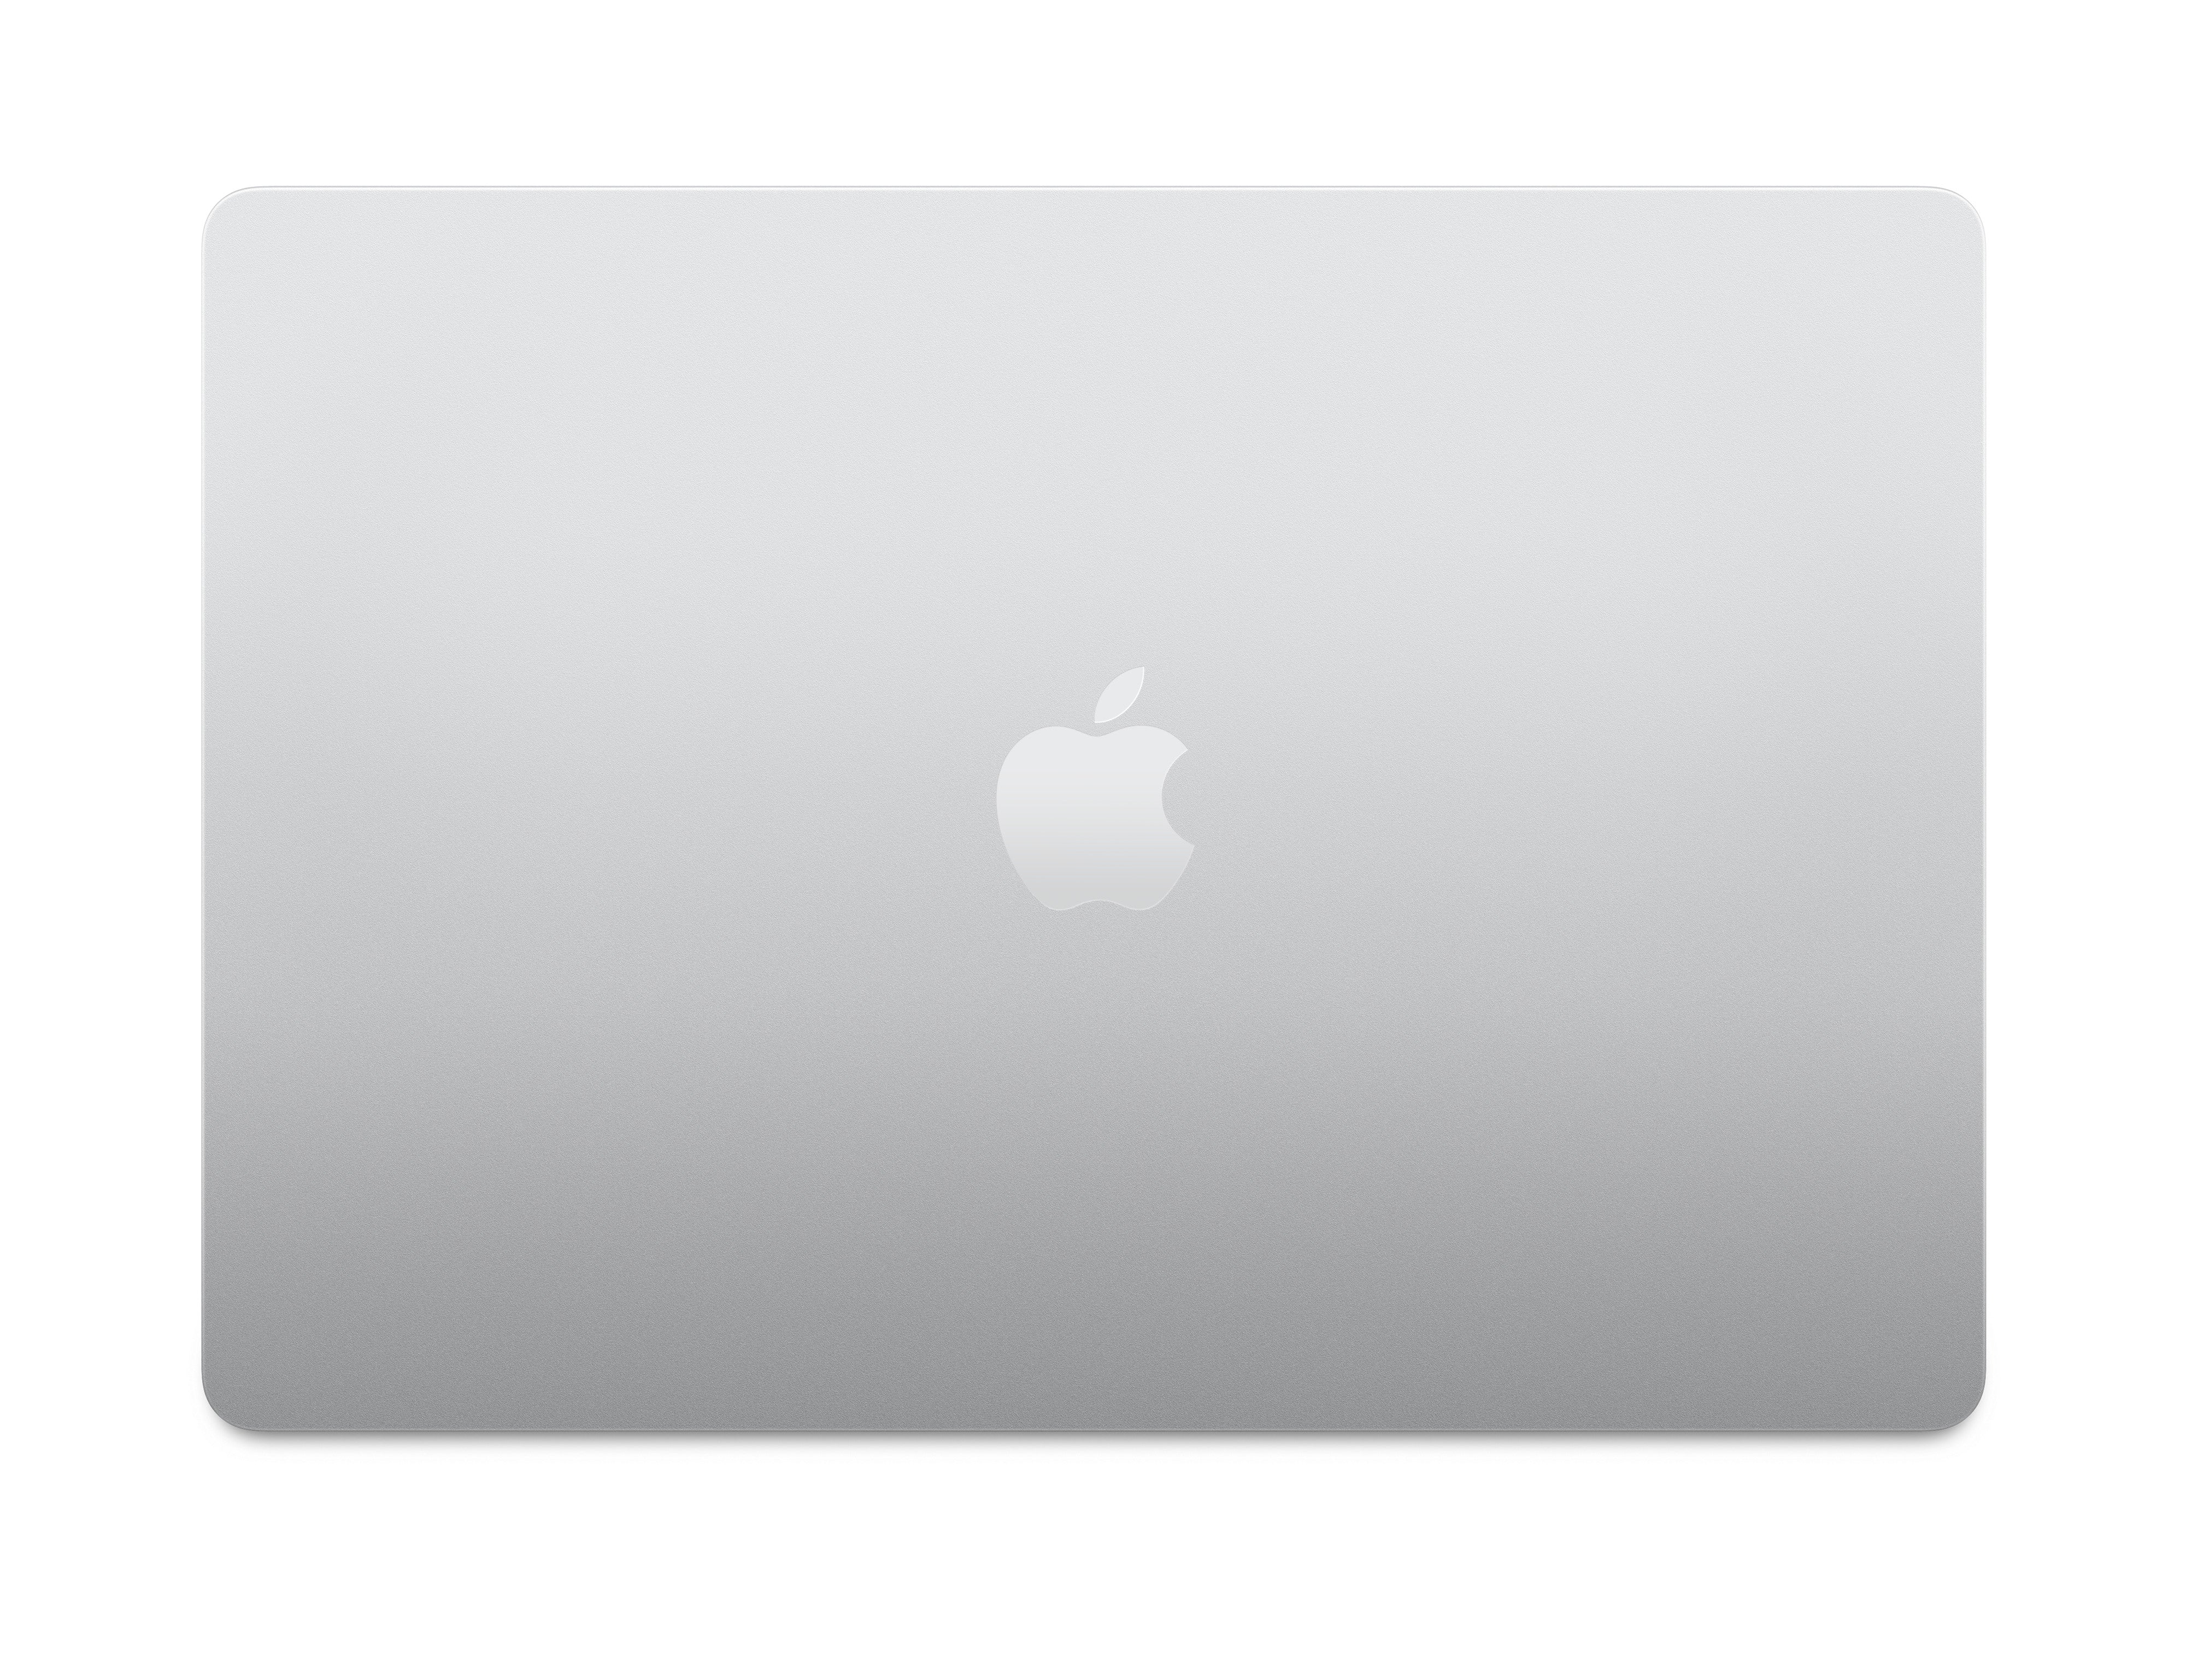 Powerful Performance: Find the 15-inch MacBook Air at iStore Mauritius